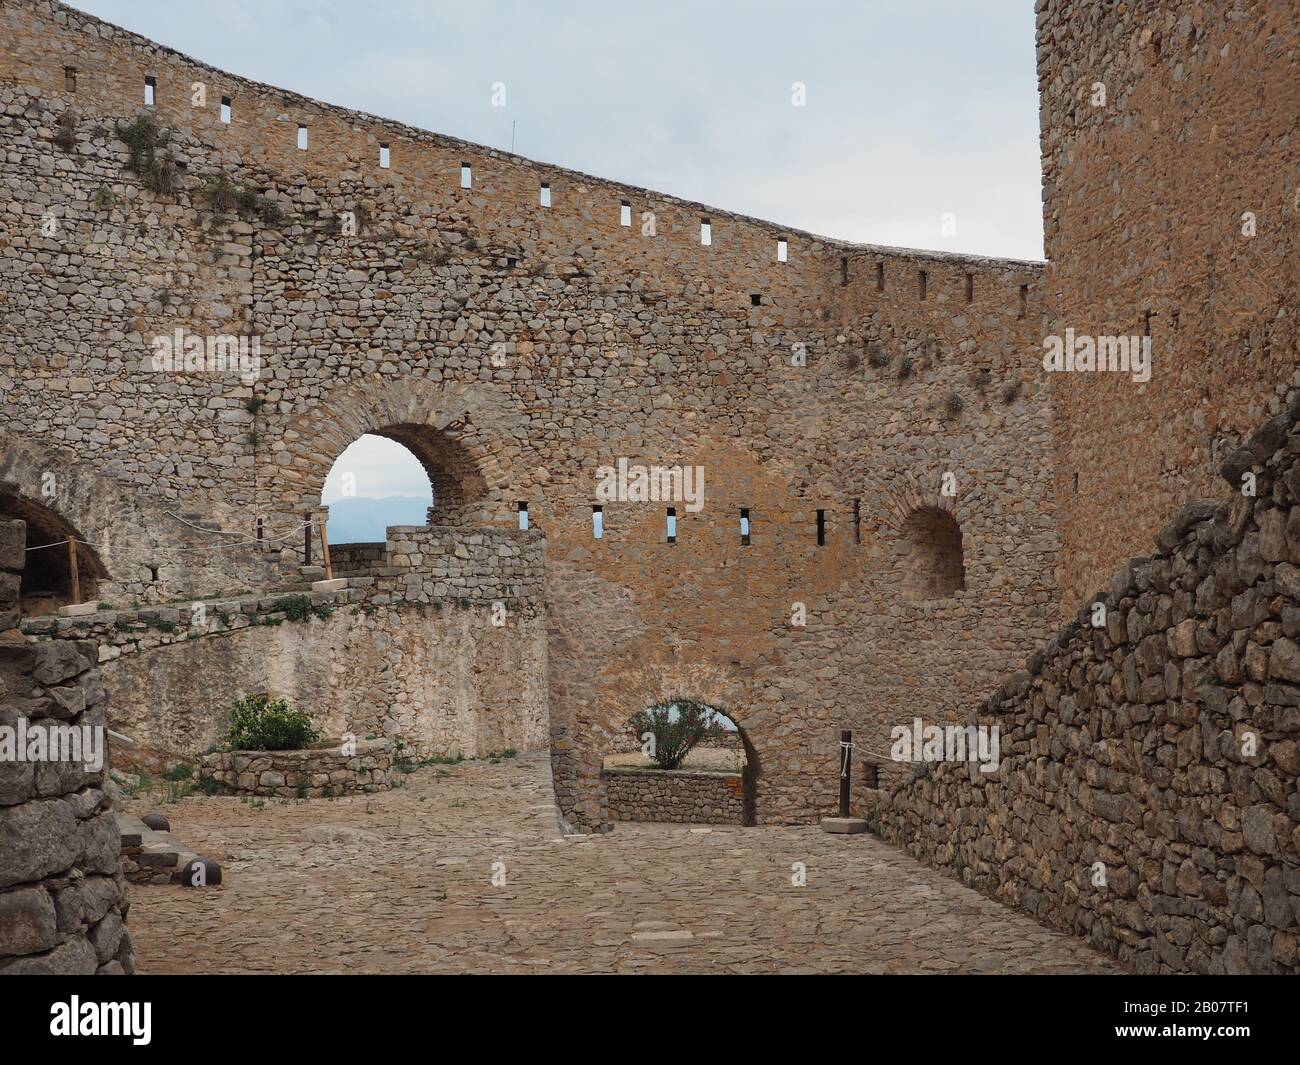 Courtyard, stone walls and battlements of the Fortress of Palamidi in Nafplion, Argolis, Peloponnese, Greece Stock Photo